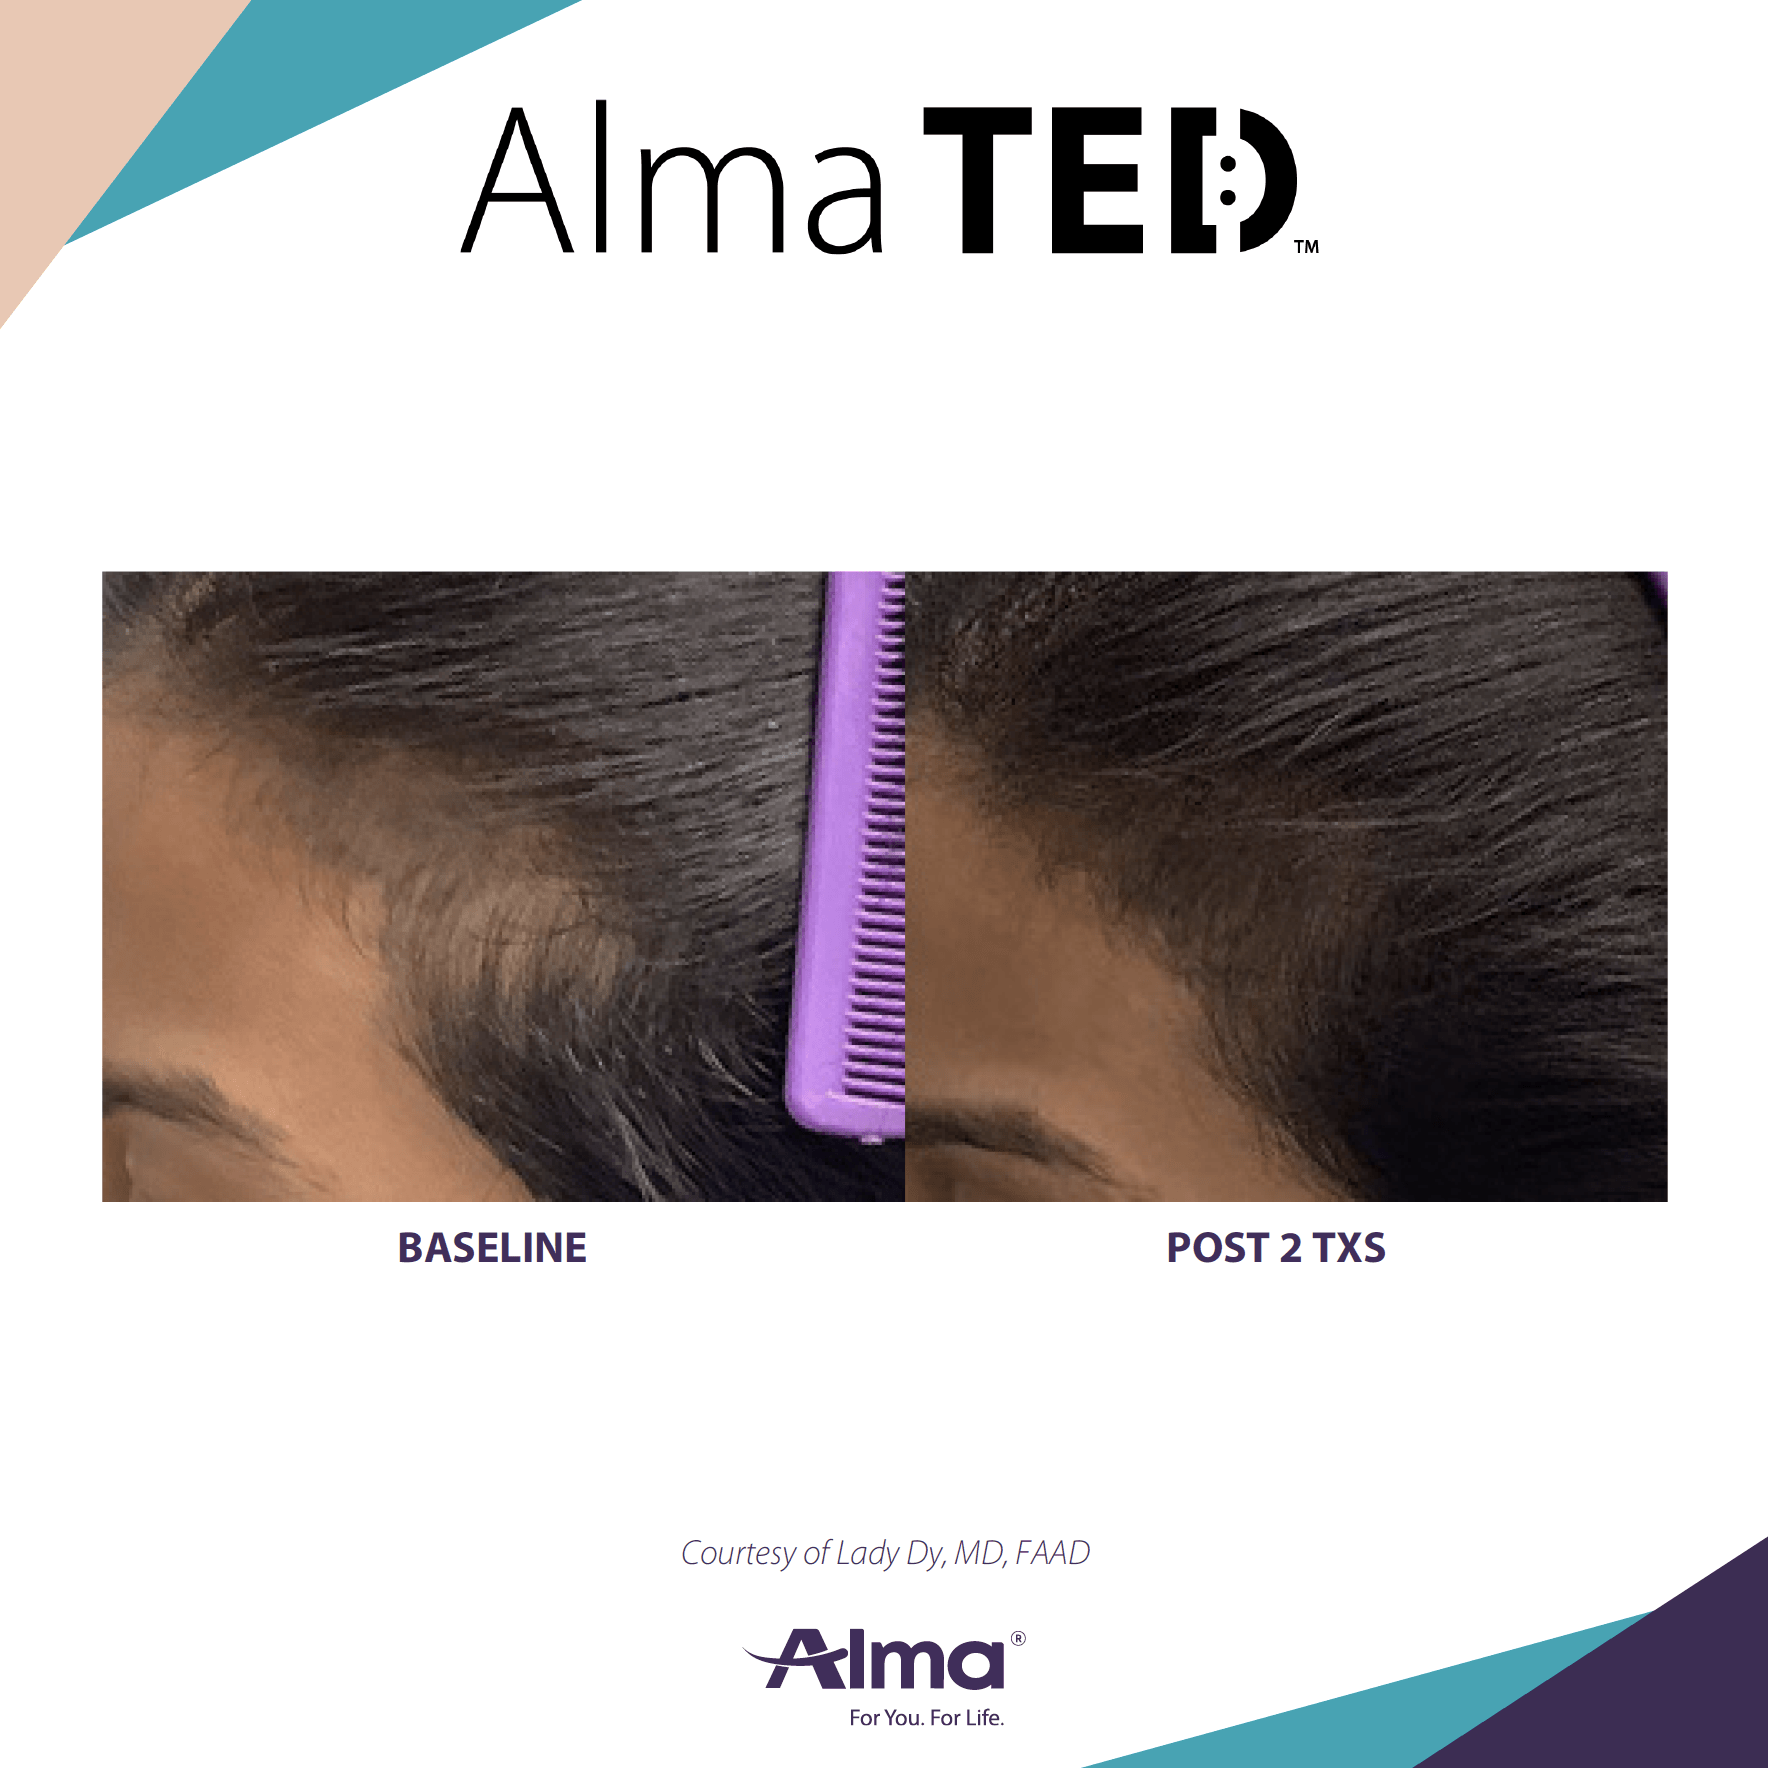 photos of female patient before and after Alma TED treatment